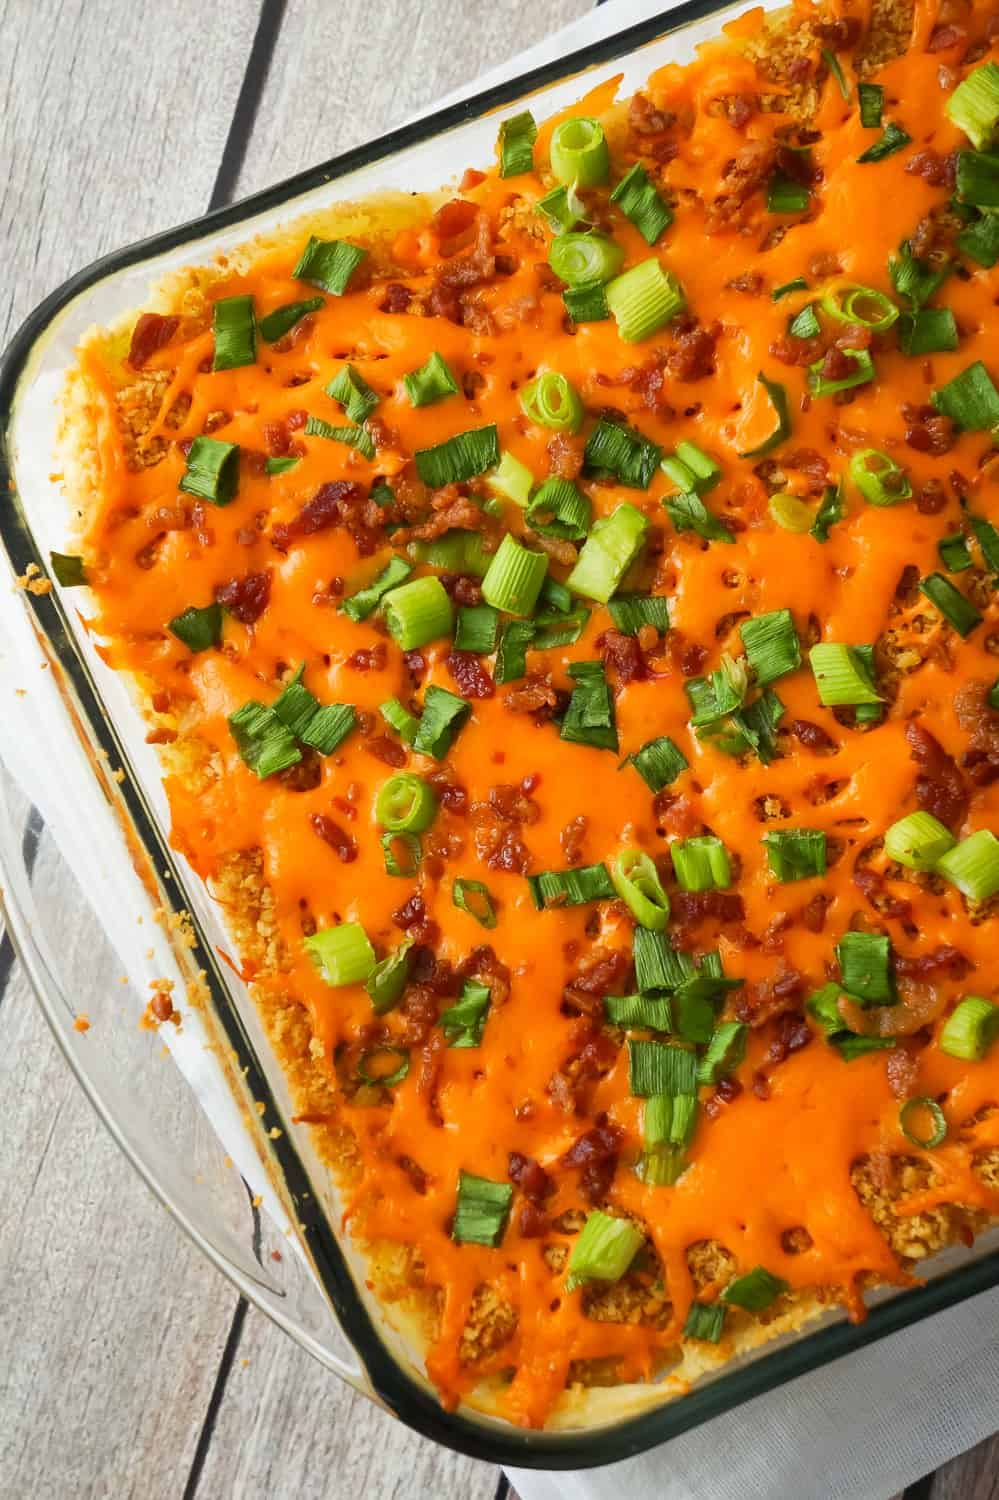 Loaded Mashed Potato Casserole is a hearty side dish recipe perfect for holiday dinners. This mashed potato casserole is loaded with cheddar cheese, bacon, onions and crushed Ritz crackers.